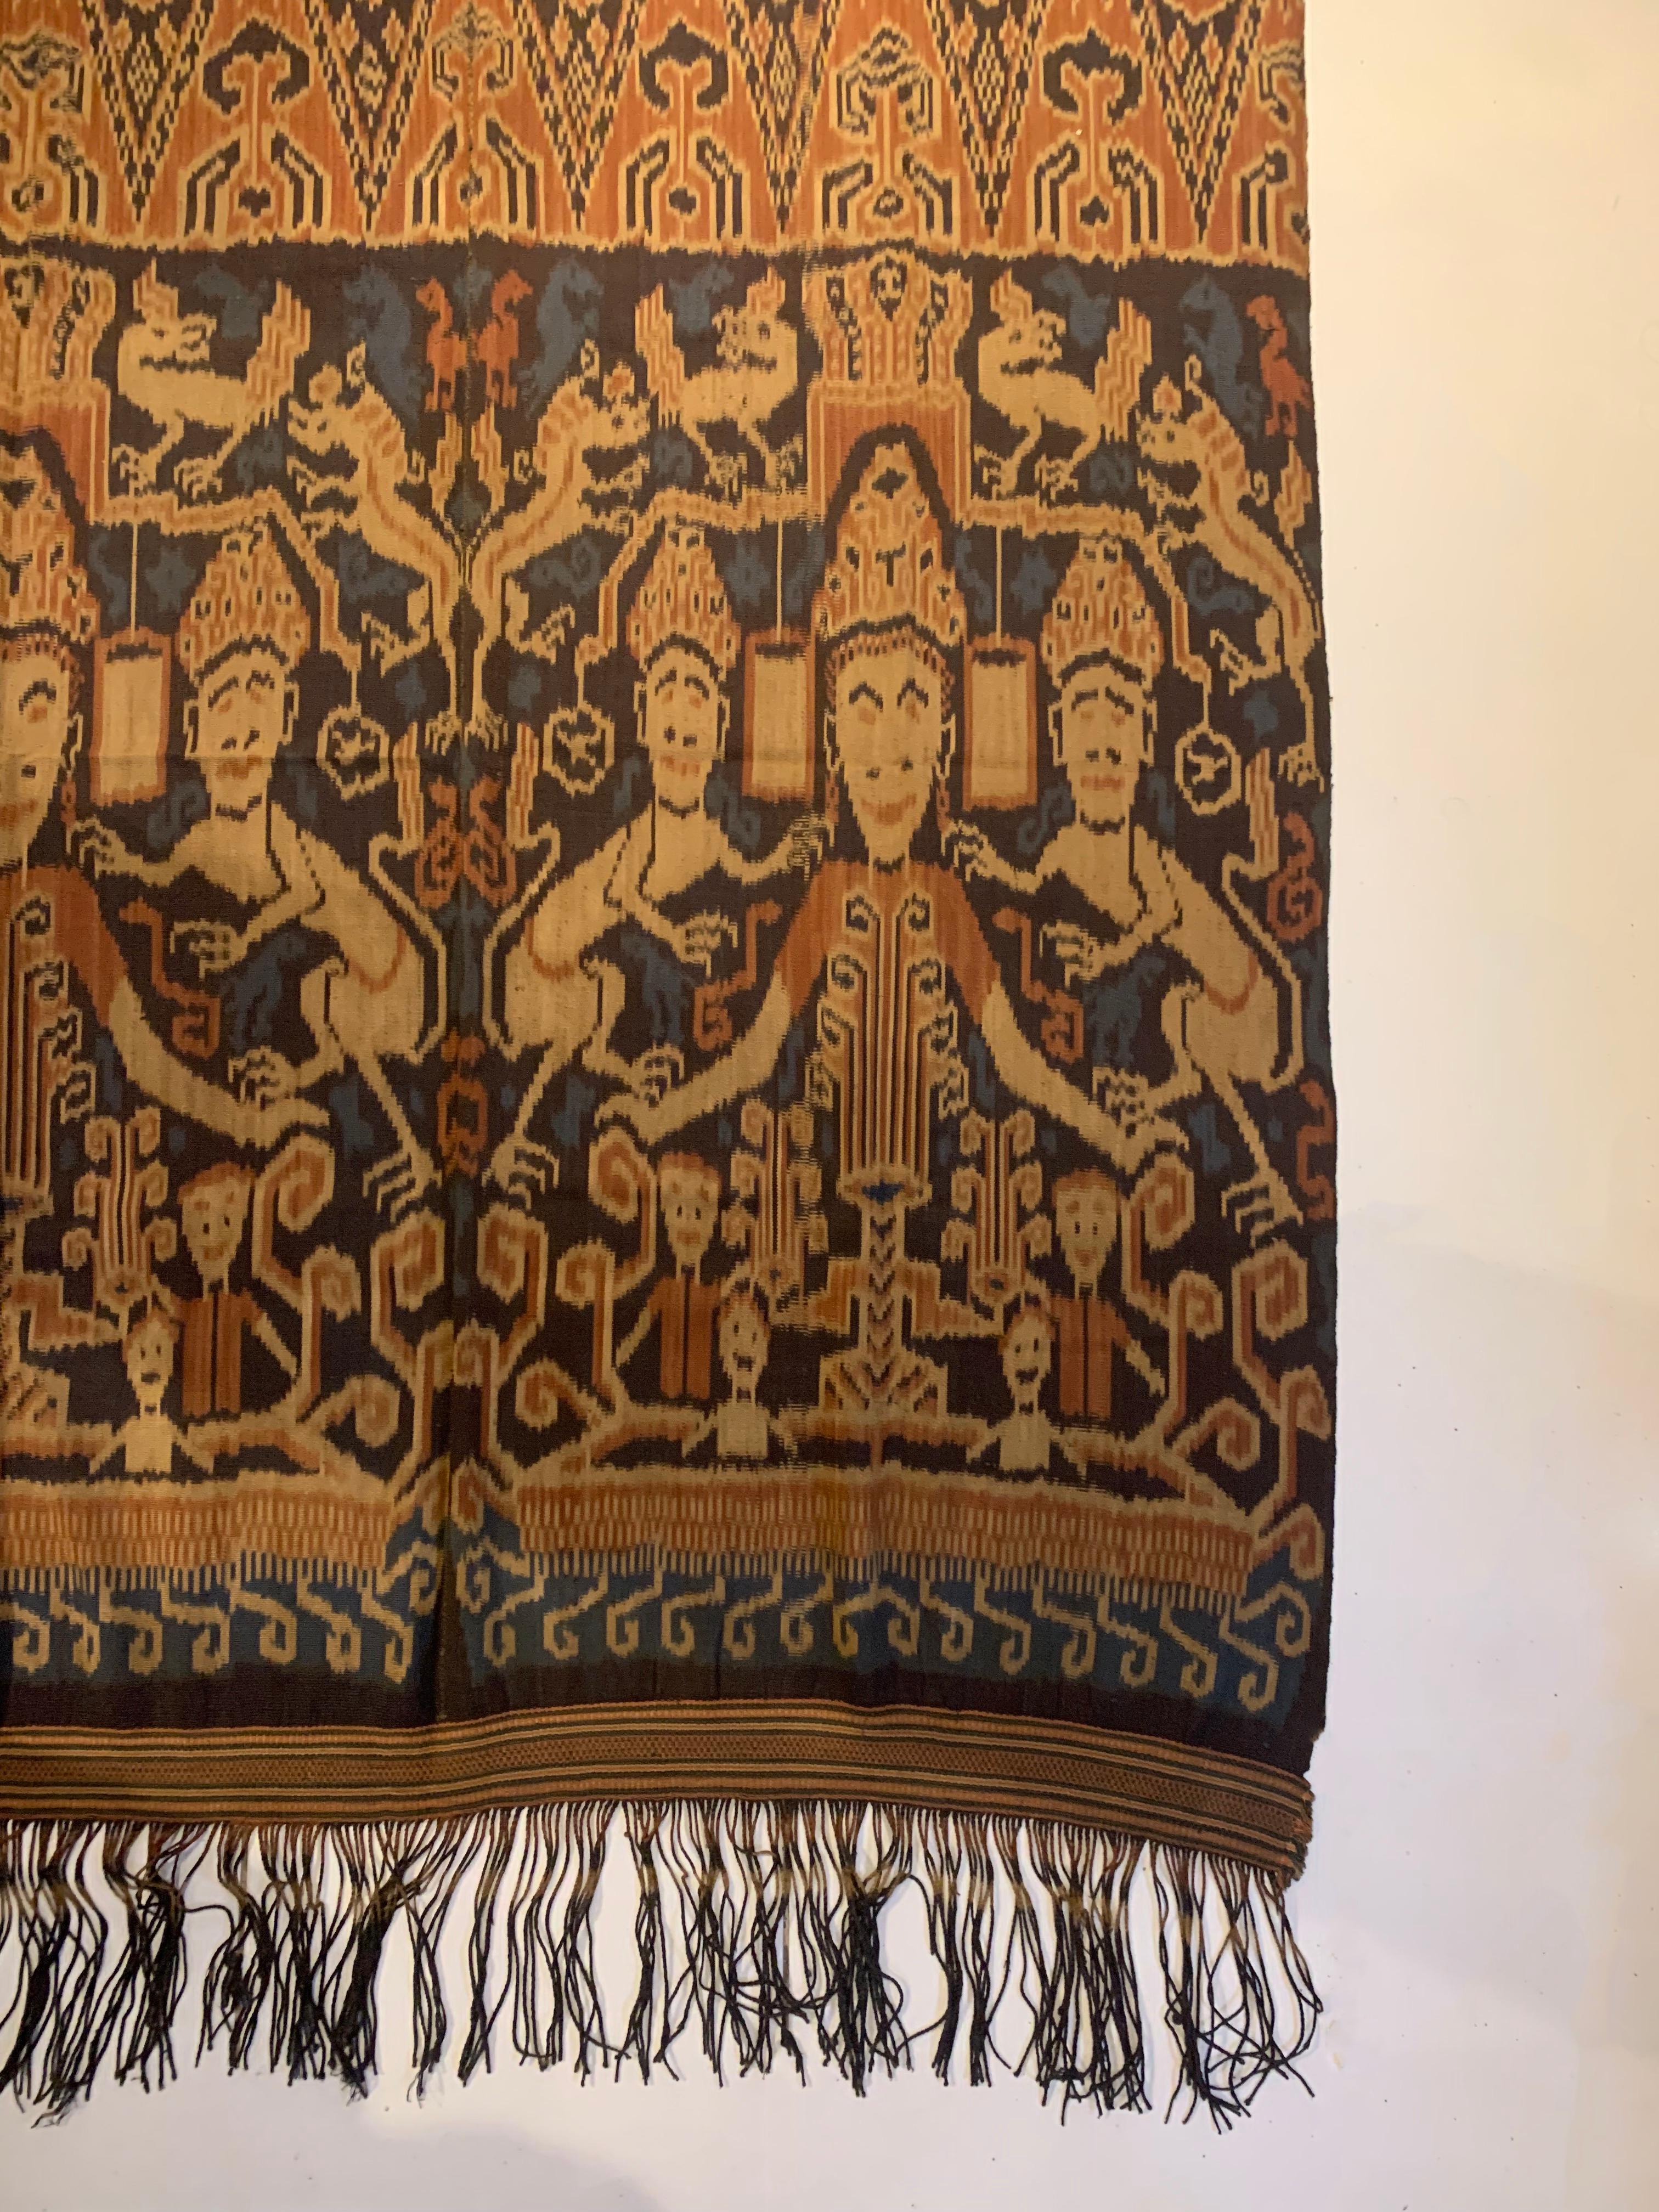 This Ikat textile originates from the Island of Sumba, Indonesia. It is hand-woven using naturally dyed yarns via a method passed on through generations. It features a stunning array of distinct tribal patterns and motifs. Chickens are a common